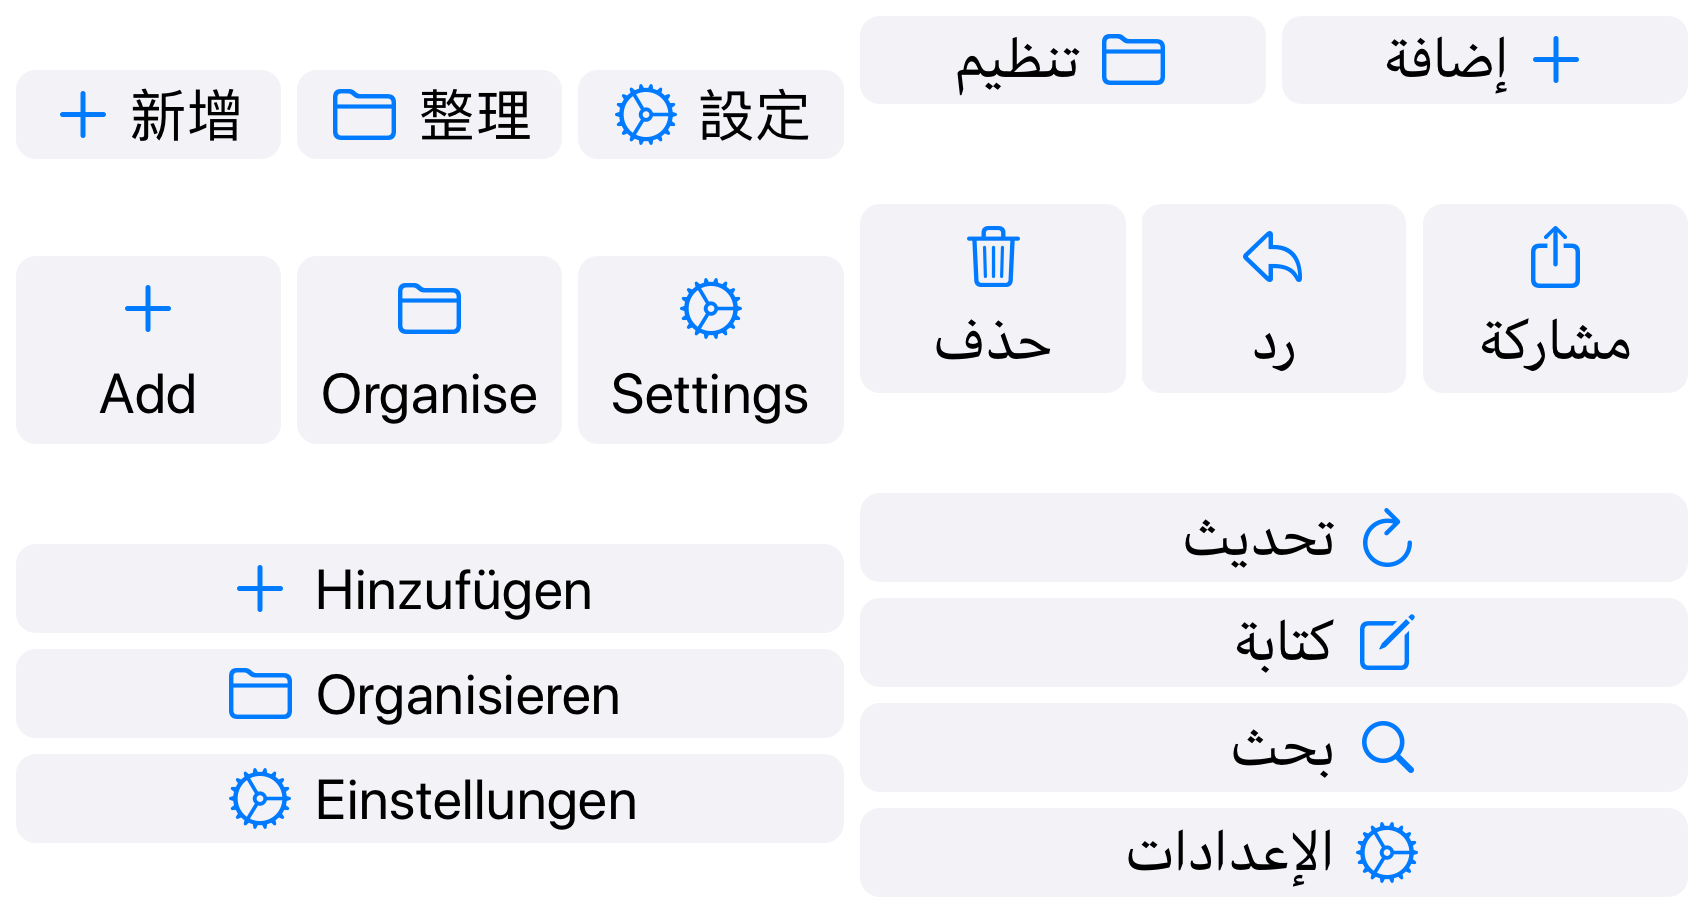 Composite screenshot of DynamicButtonStack in various languages. Chinese, English, German, Arabic.